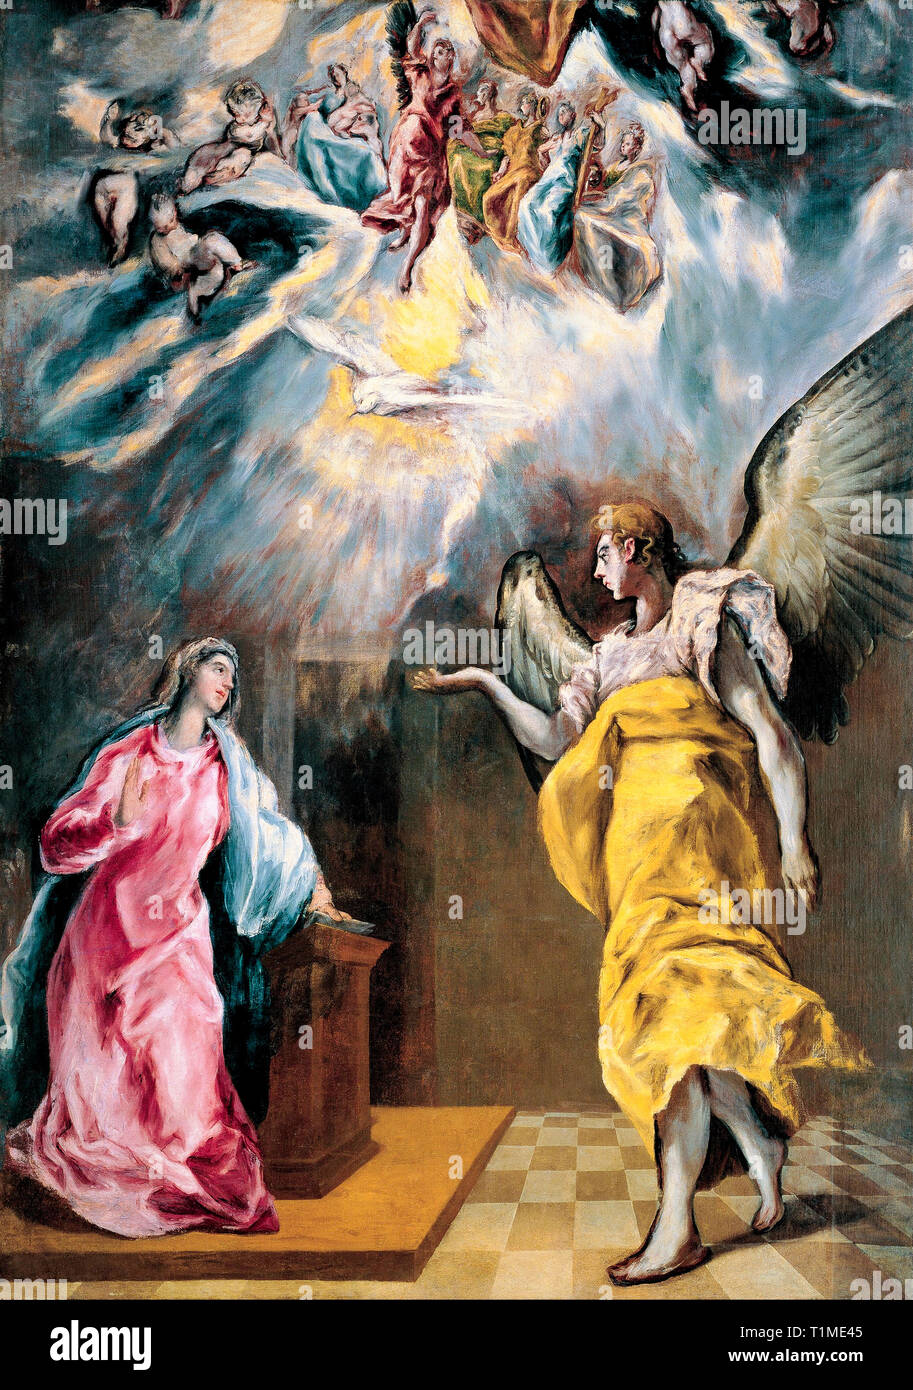 El Greco, The Annunciation, painting, 1614 Stock Photo